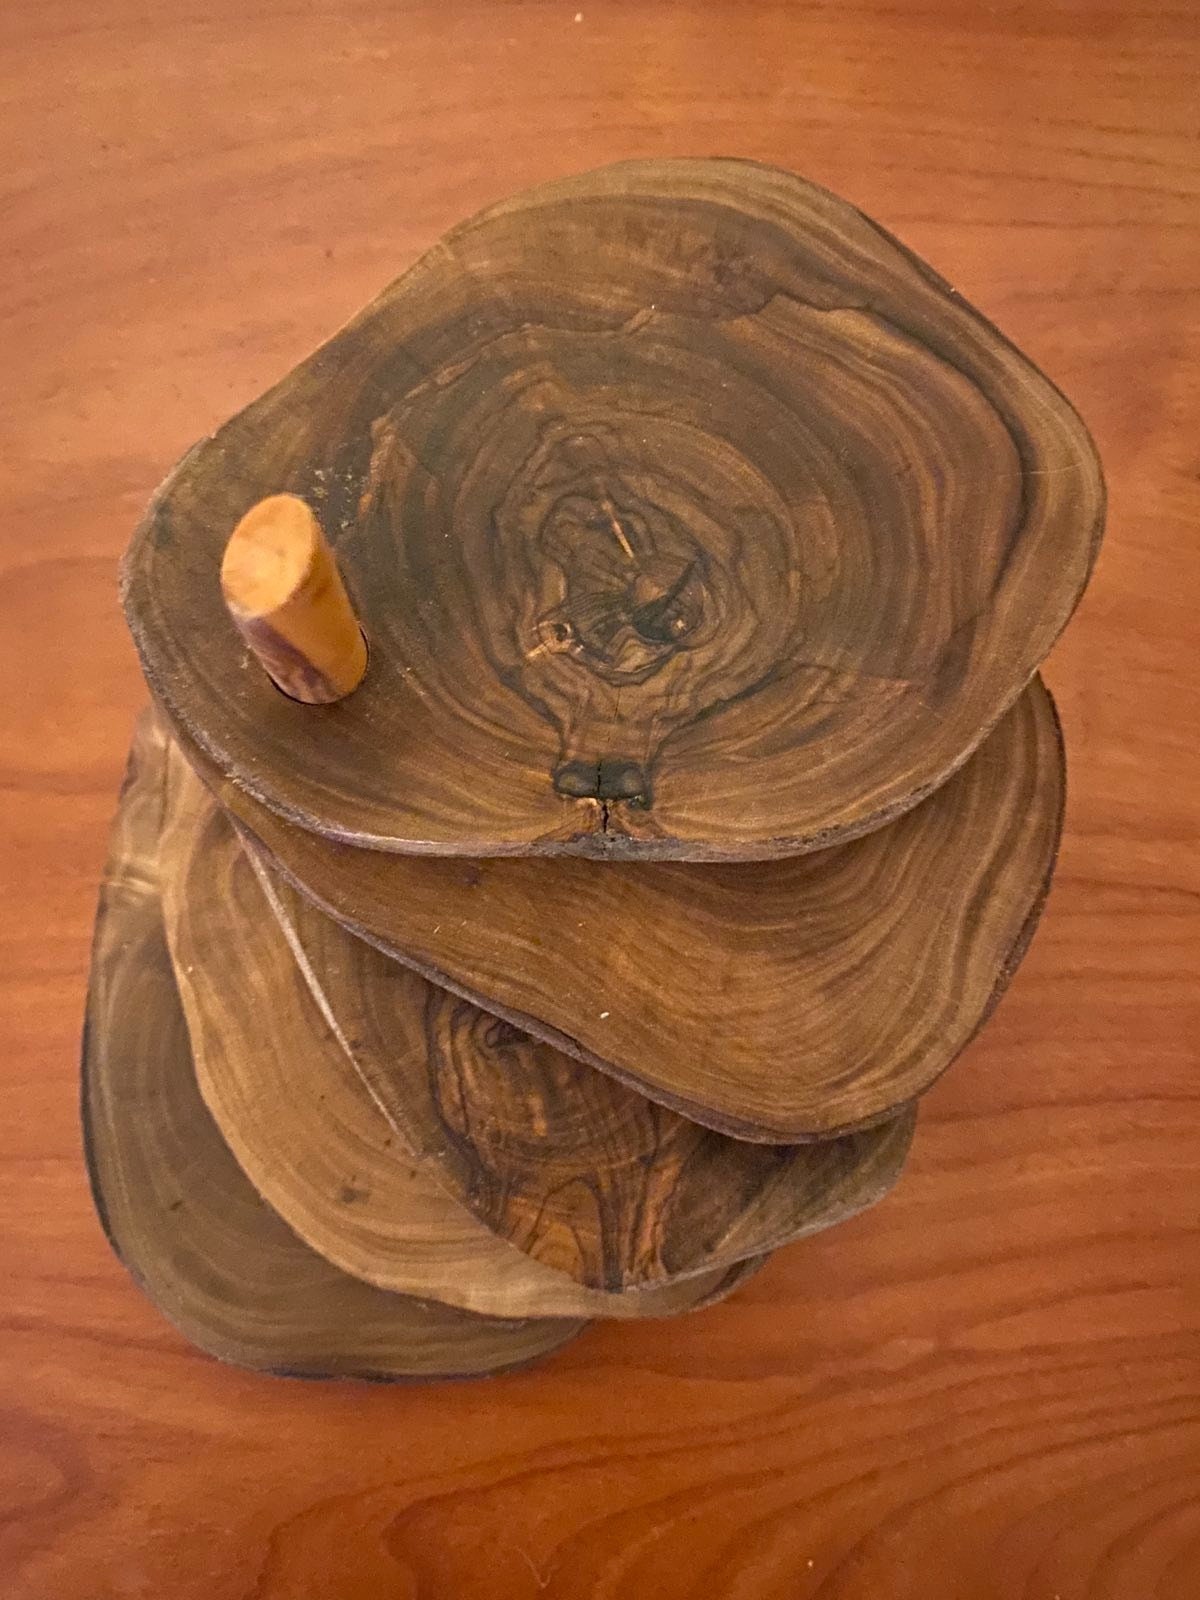 Olive Wood Square Coasters - Set of 4 - Naturally Med